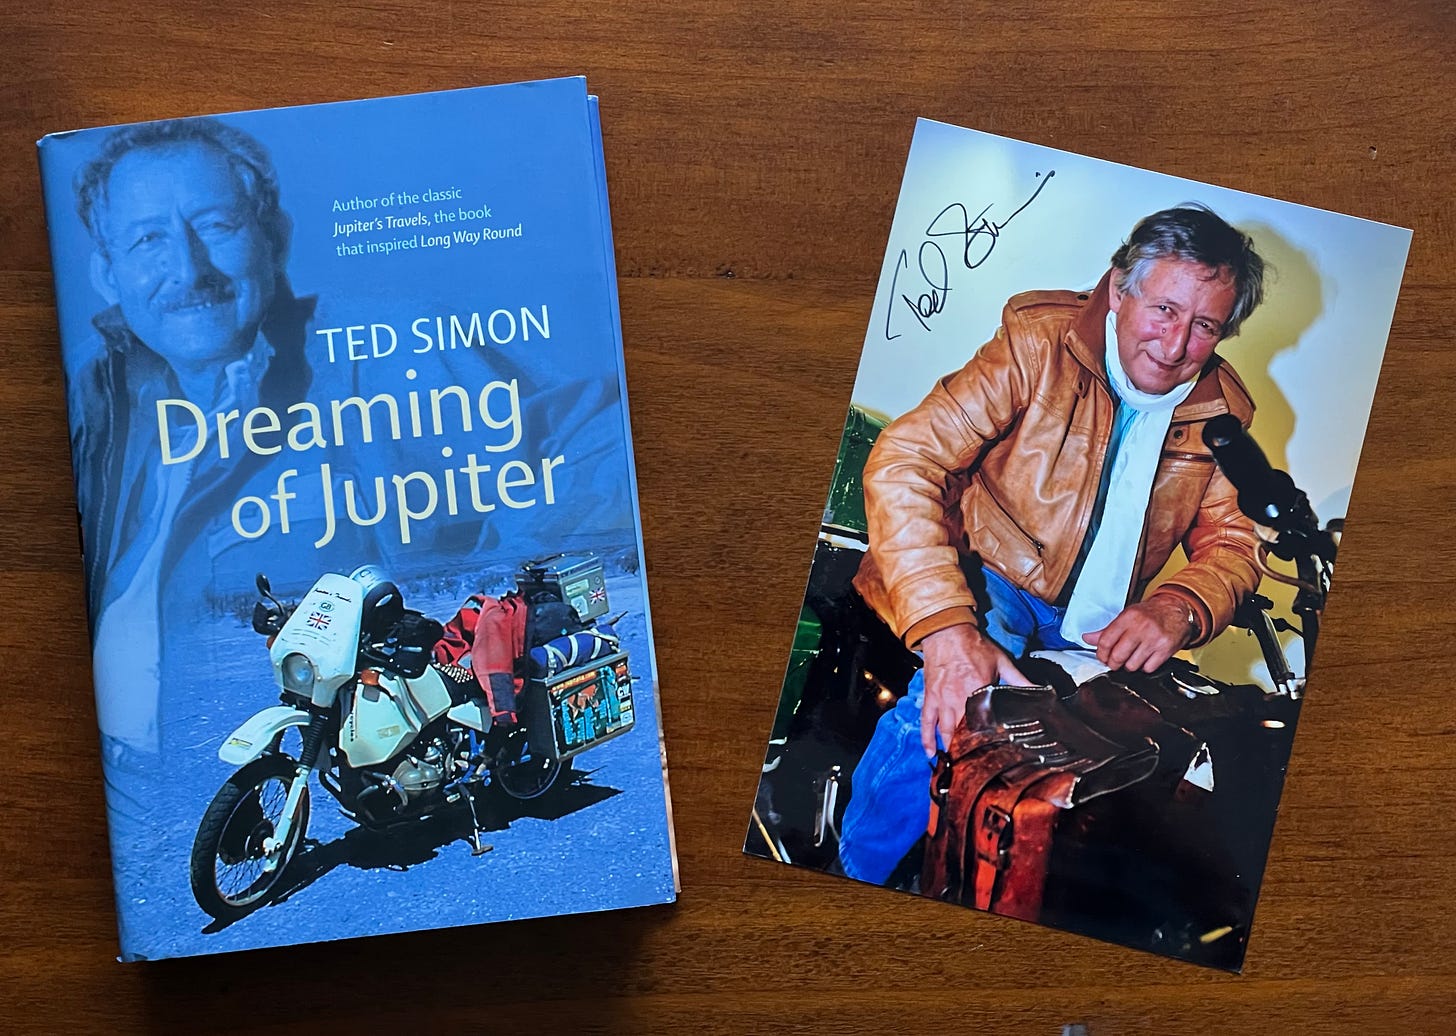 A photograph of Ted Simon's book dreaming of Jupiter. Next to it sits a signed photograph of Ted Simon. It was found in the book.